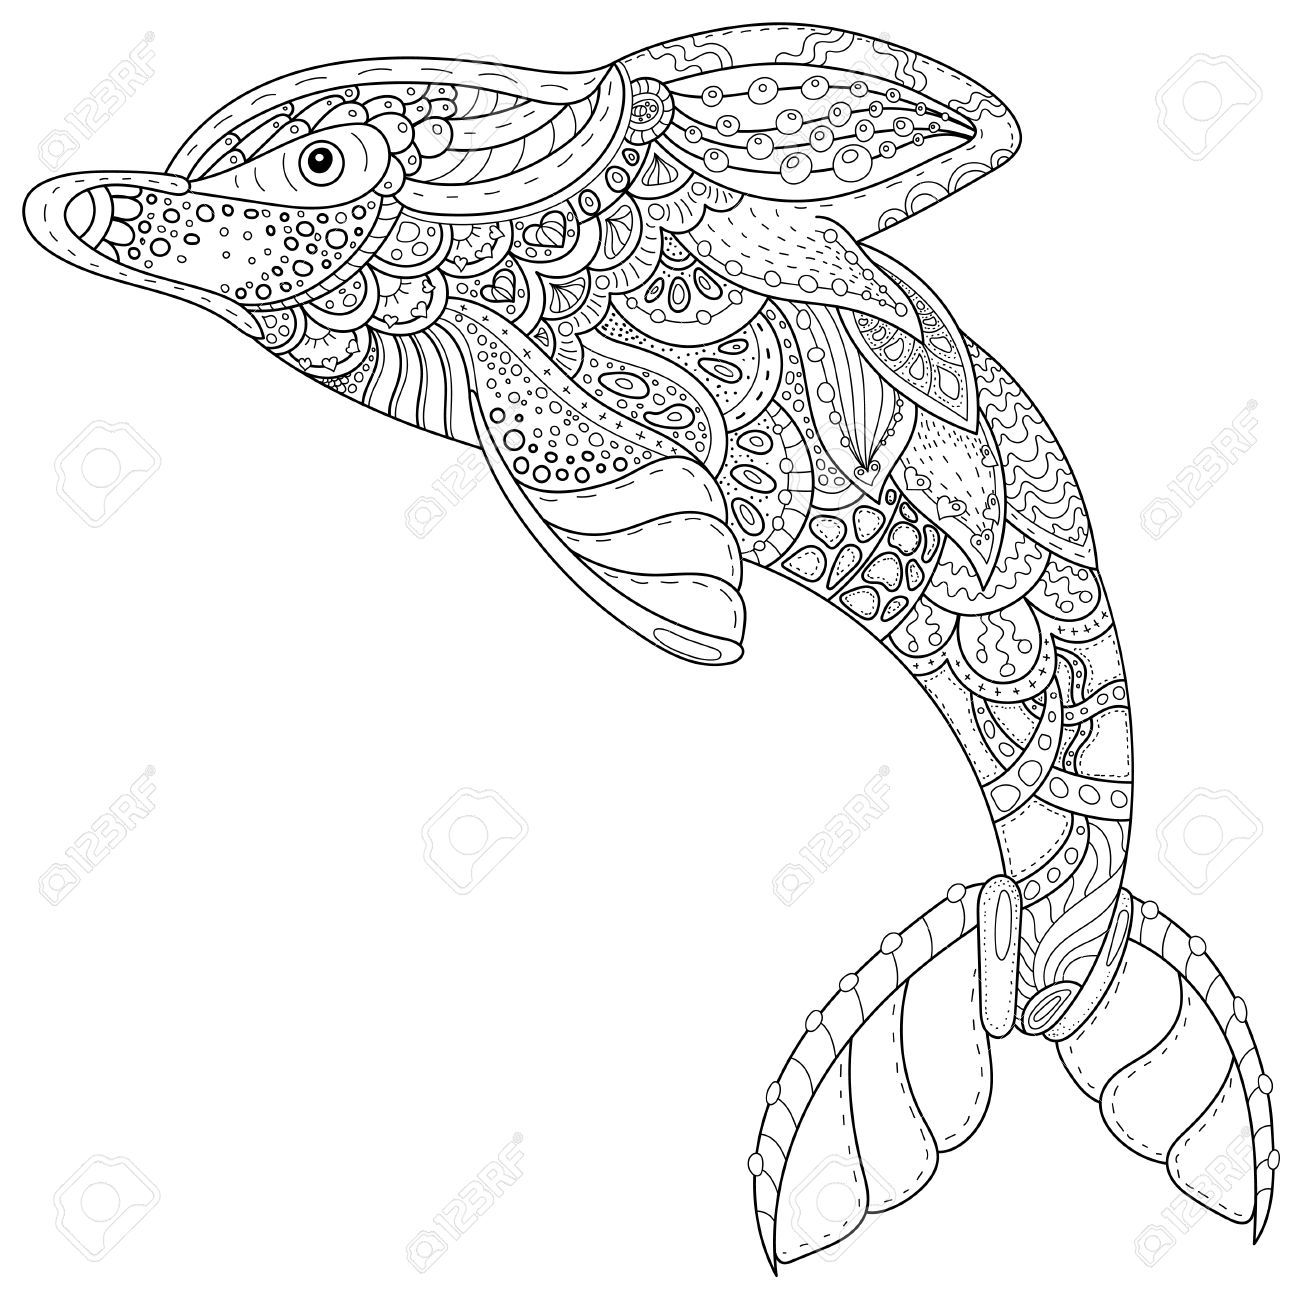 Spirit Animal Coloring Pages at GetColoringscom Free